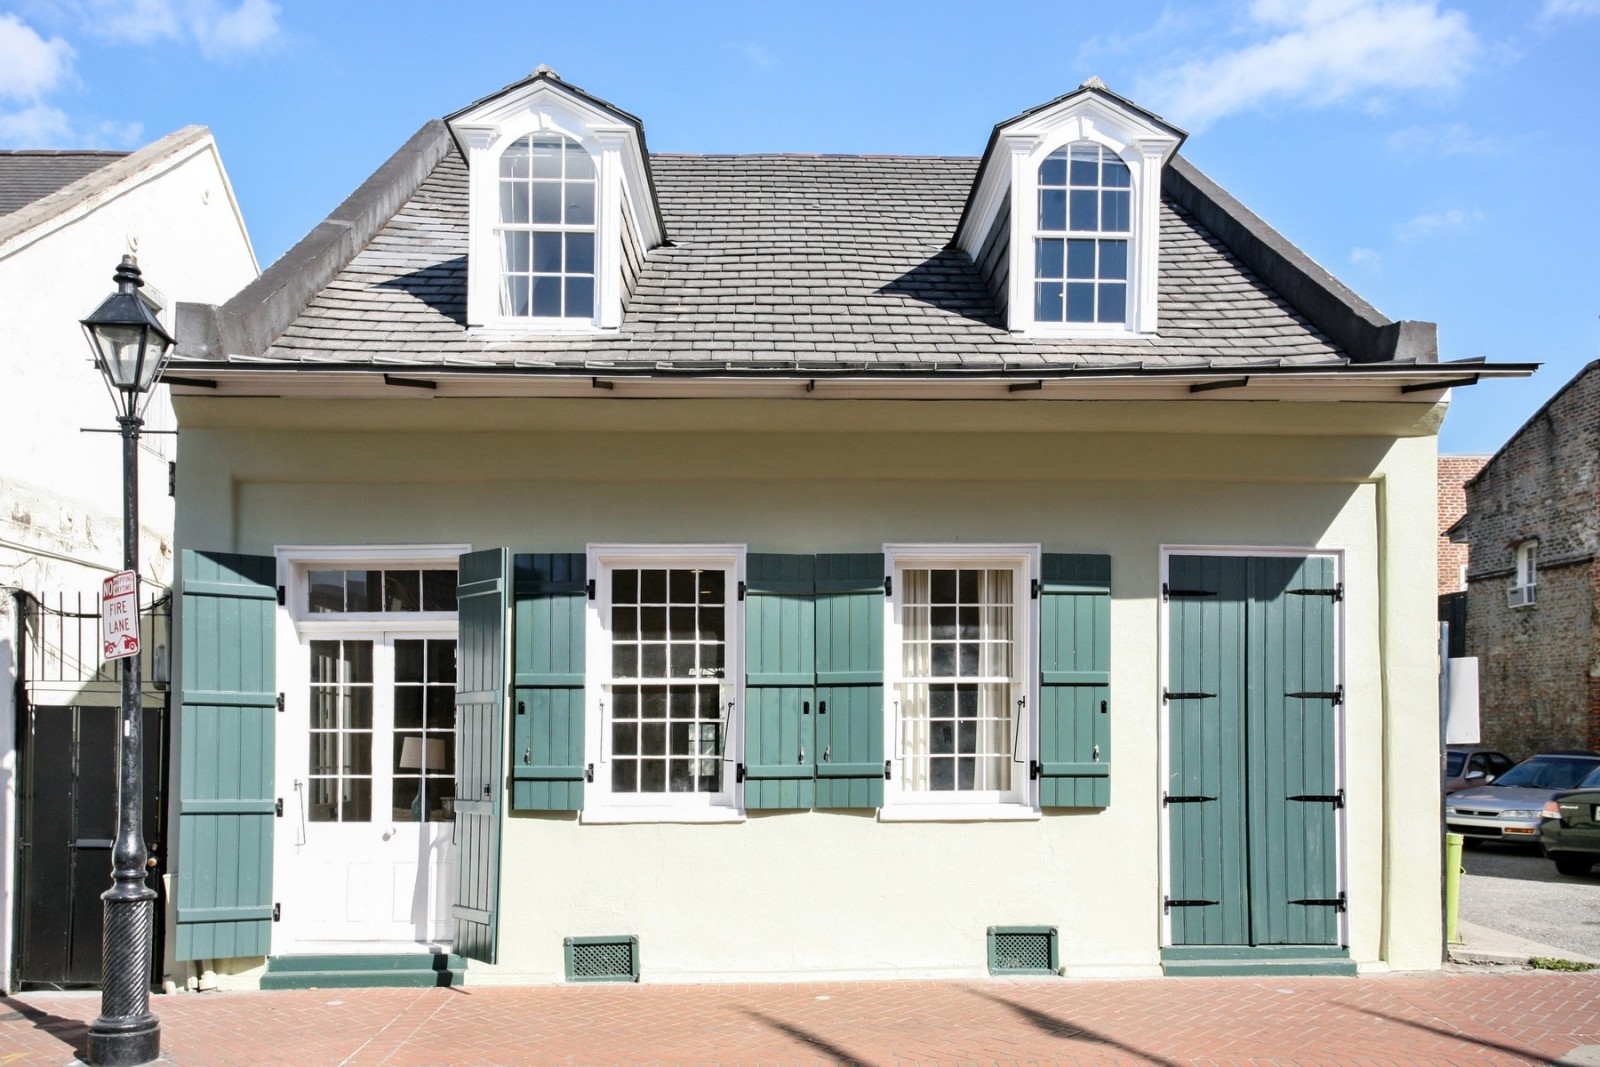 House Of The Week An Early 1800s Creole Cottage In The French Quarter